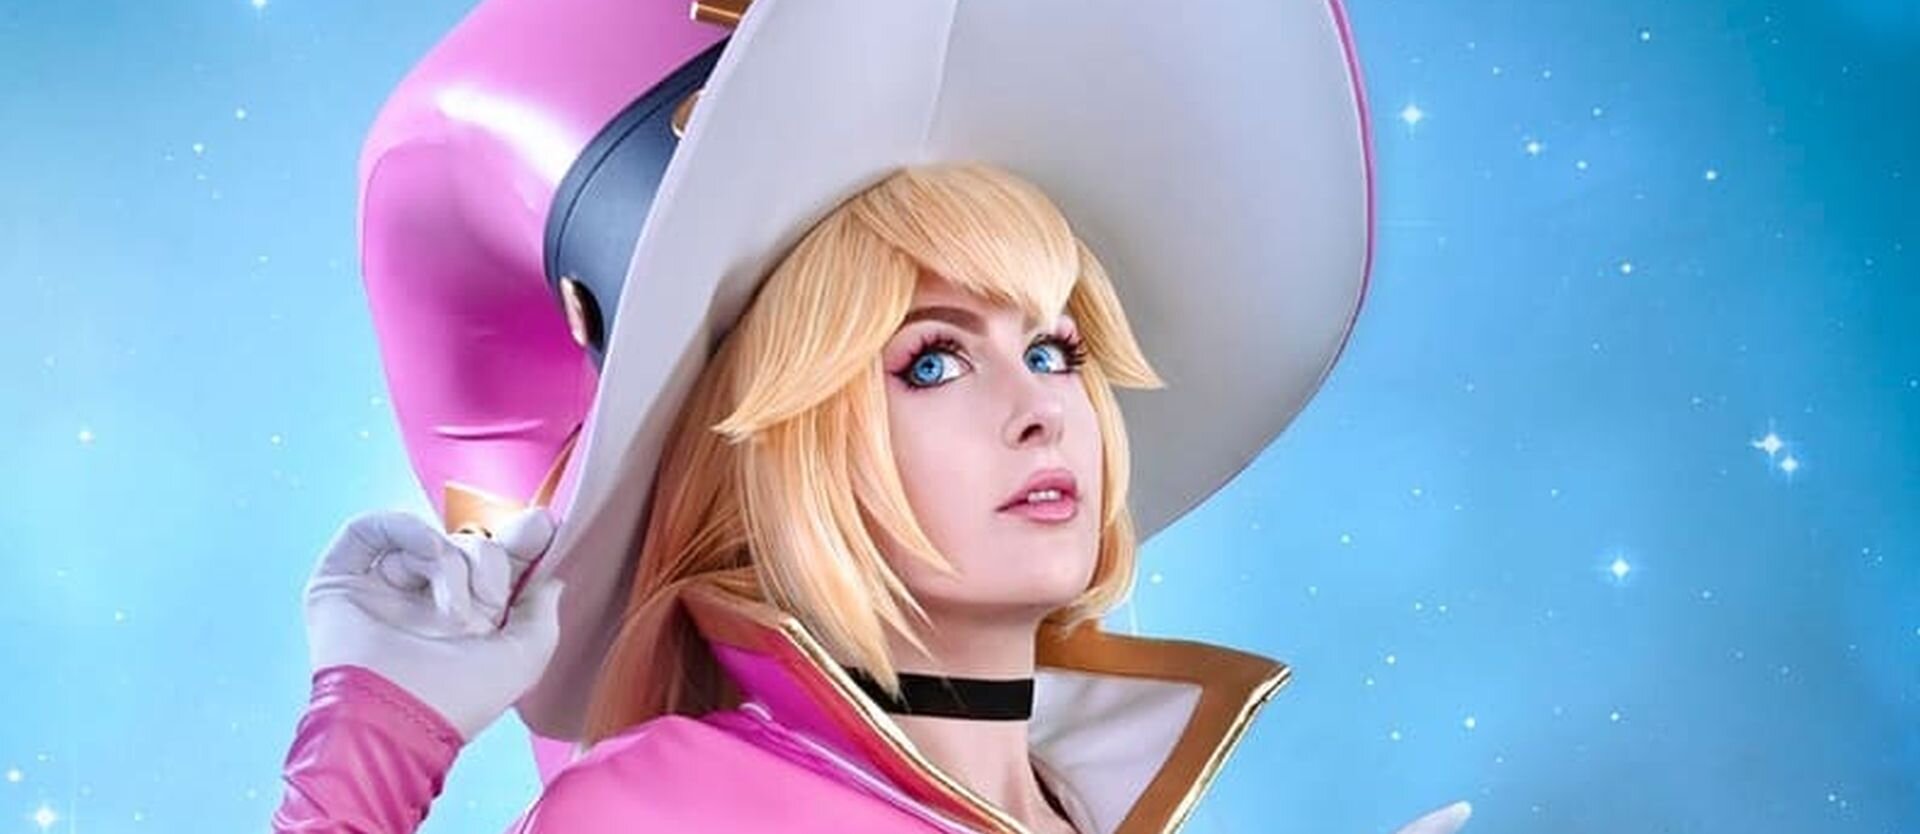 And cosplay peaches World's #1